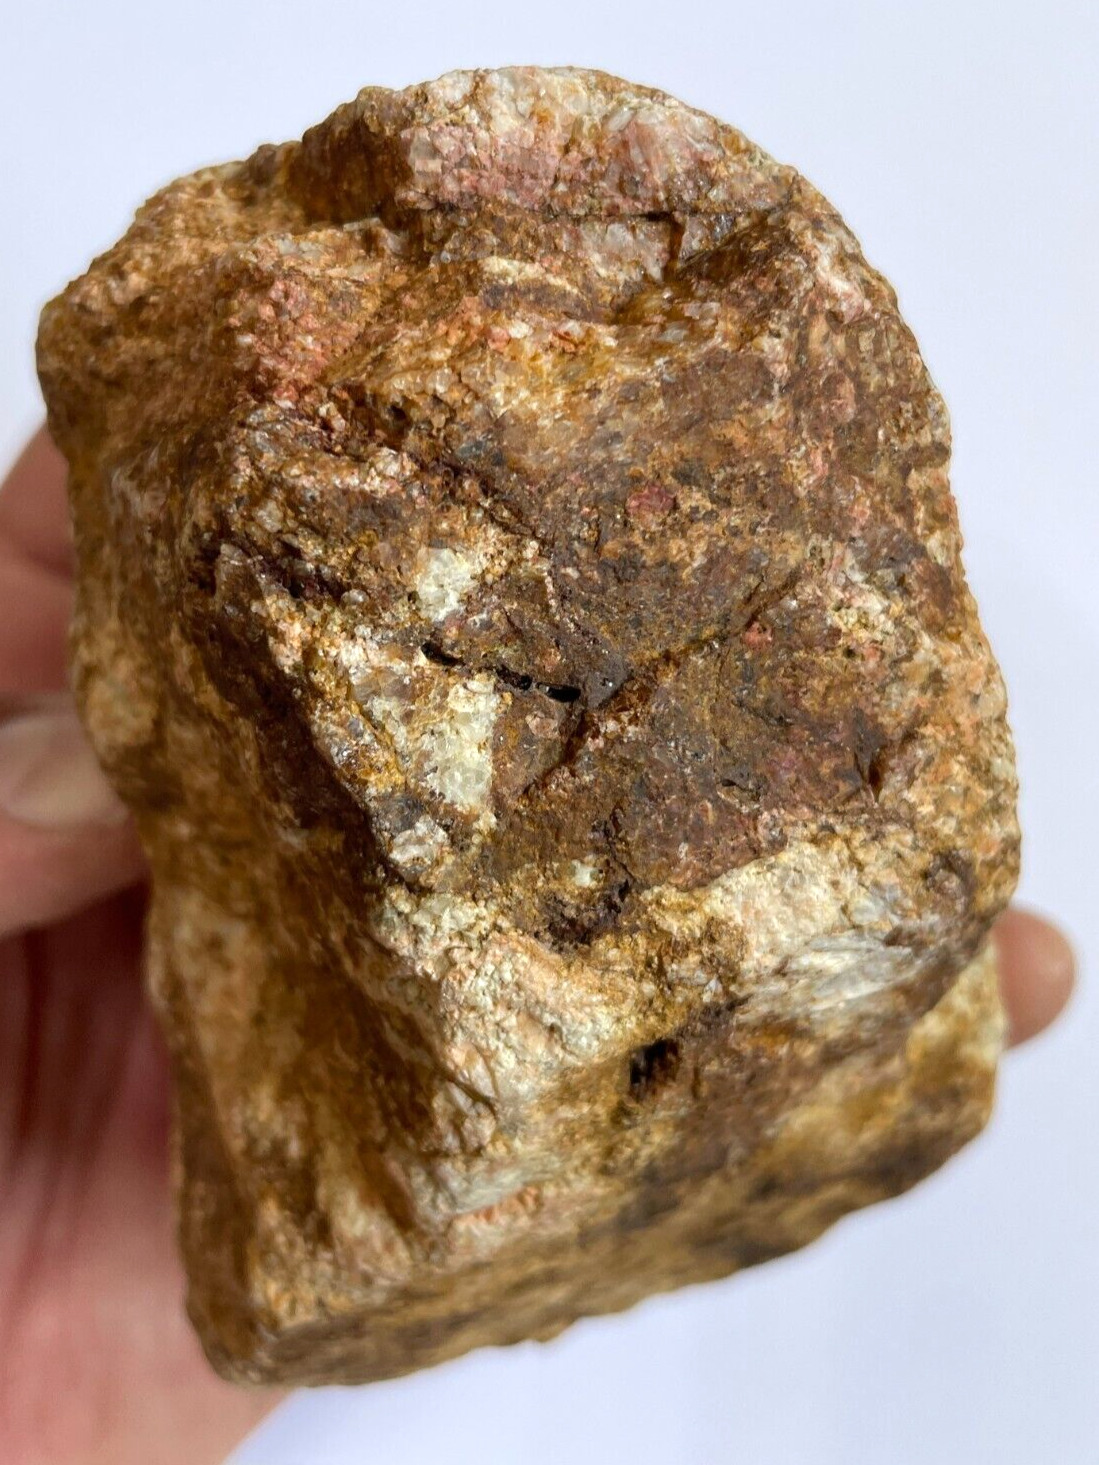 19+ OUNCE FINE GOLD ORE from California Raw Specimen Los Angeles 546.24 Grams